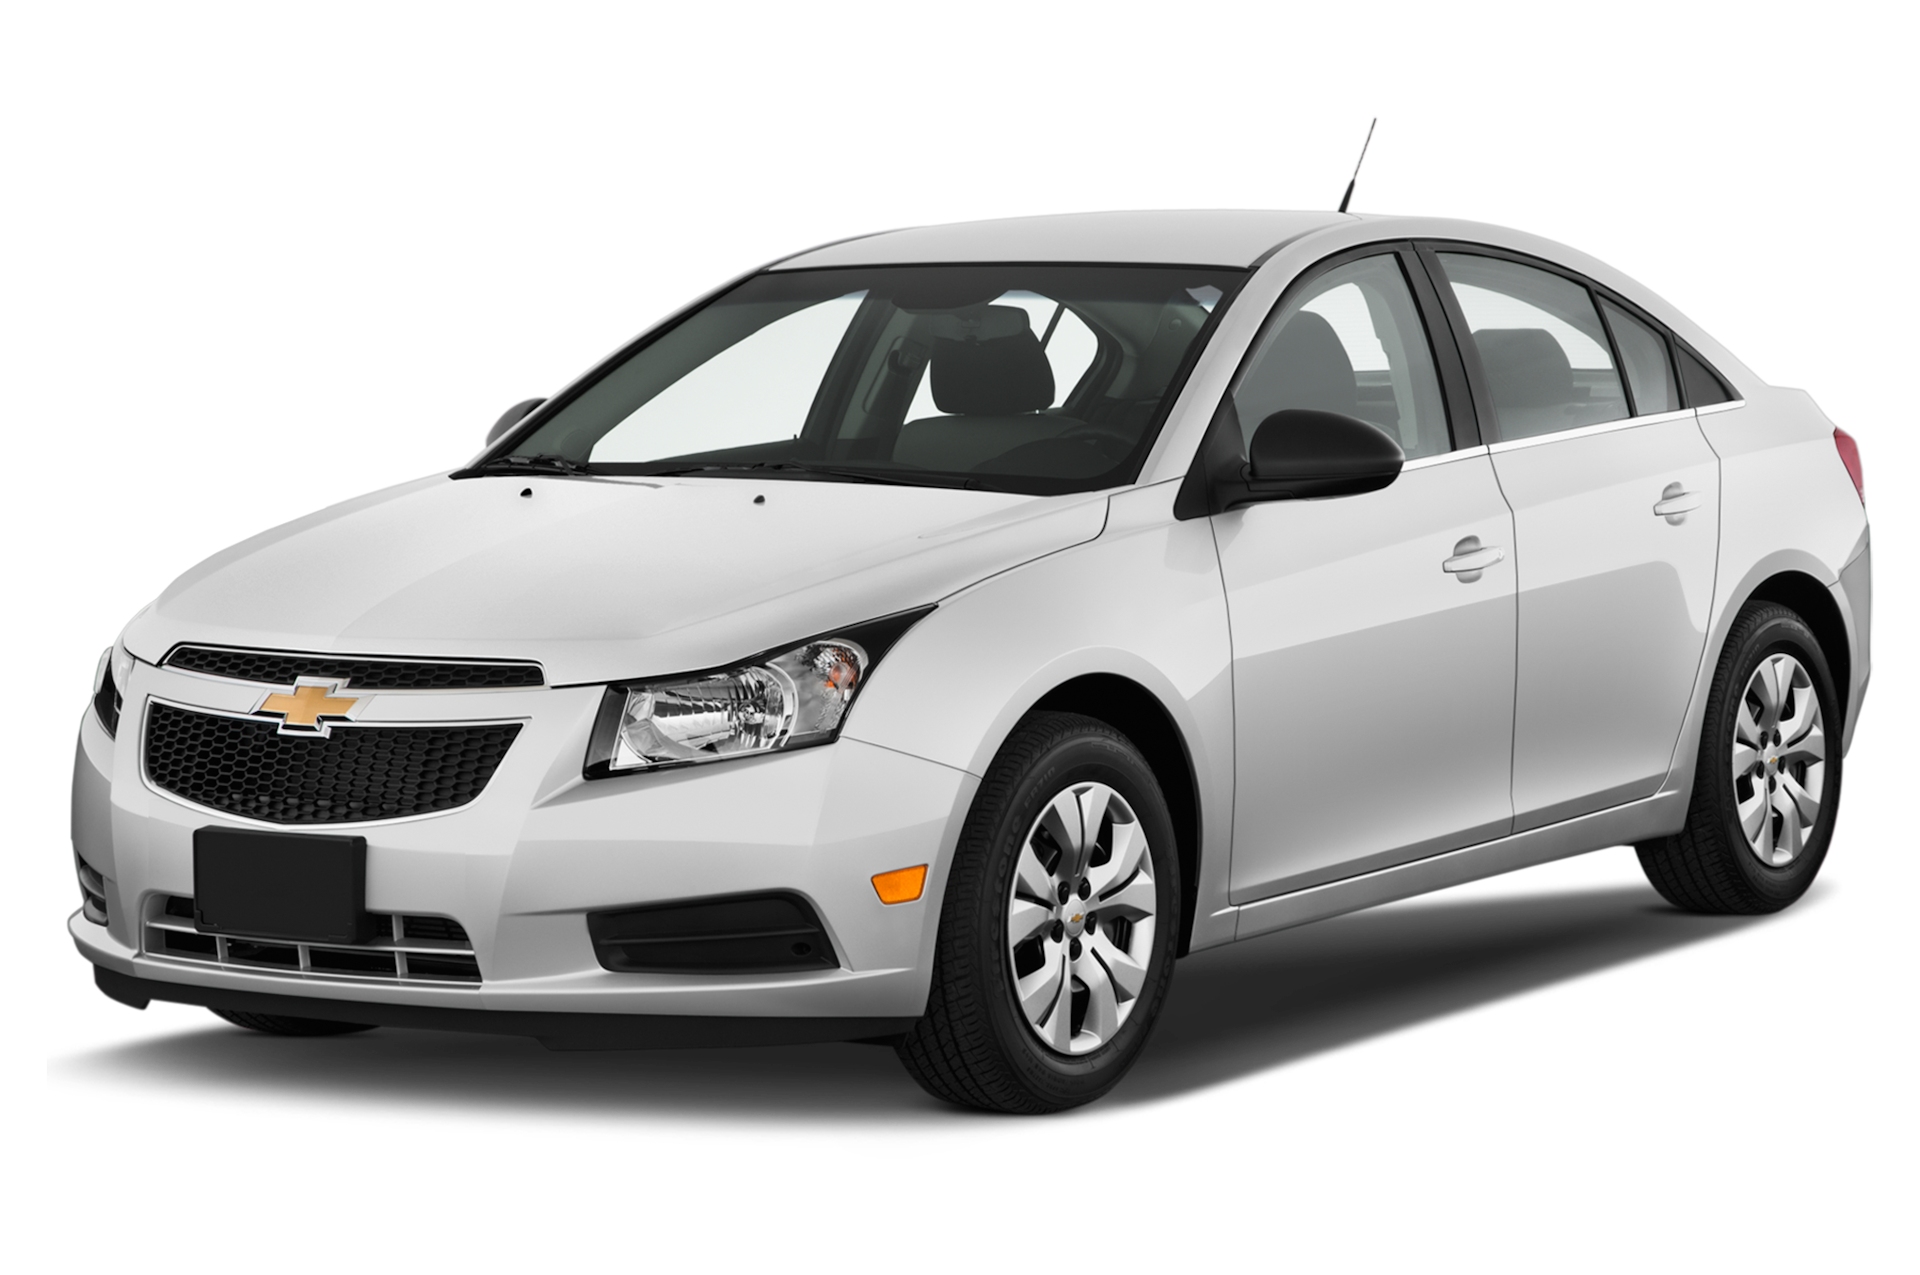 2012 Chevrolet Cruze Prices, Reviews, and Photos - MotorTrend